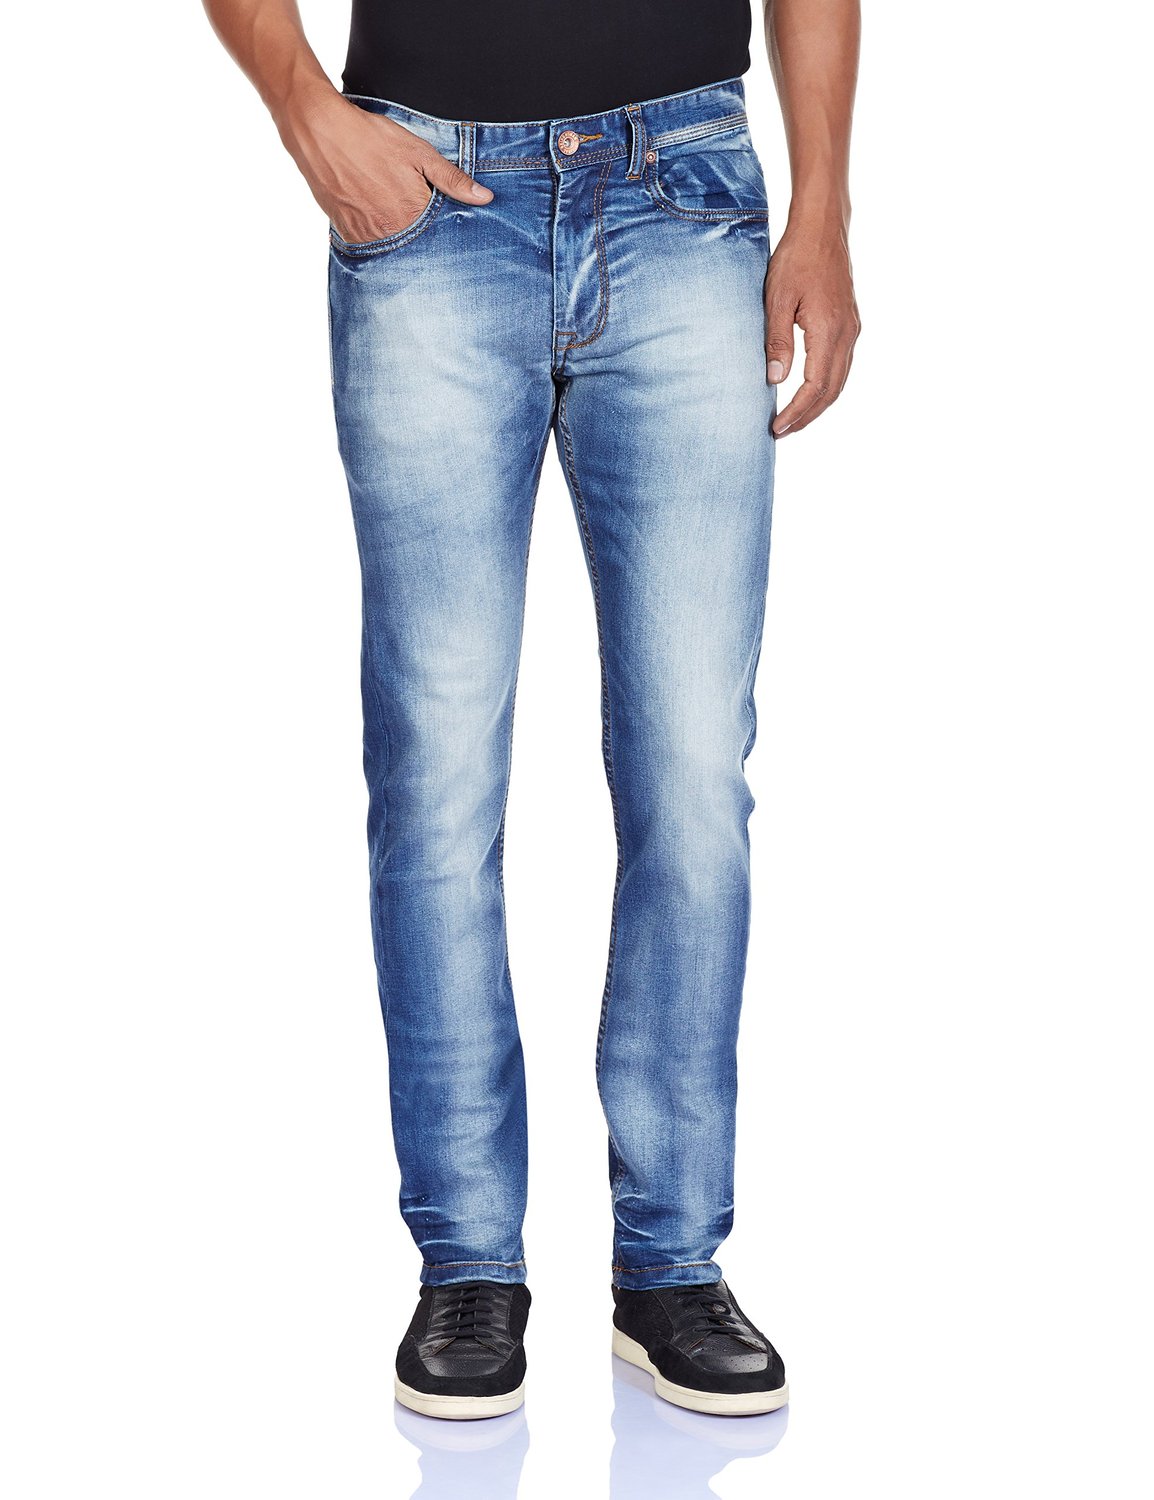 Buy Casul Mens Custom Skinny Fit Jeans Online @ ₹1250 from ShopClues